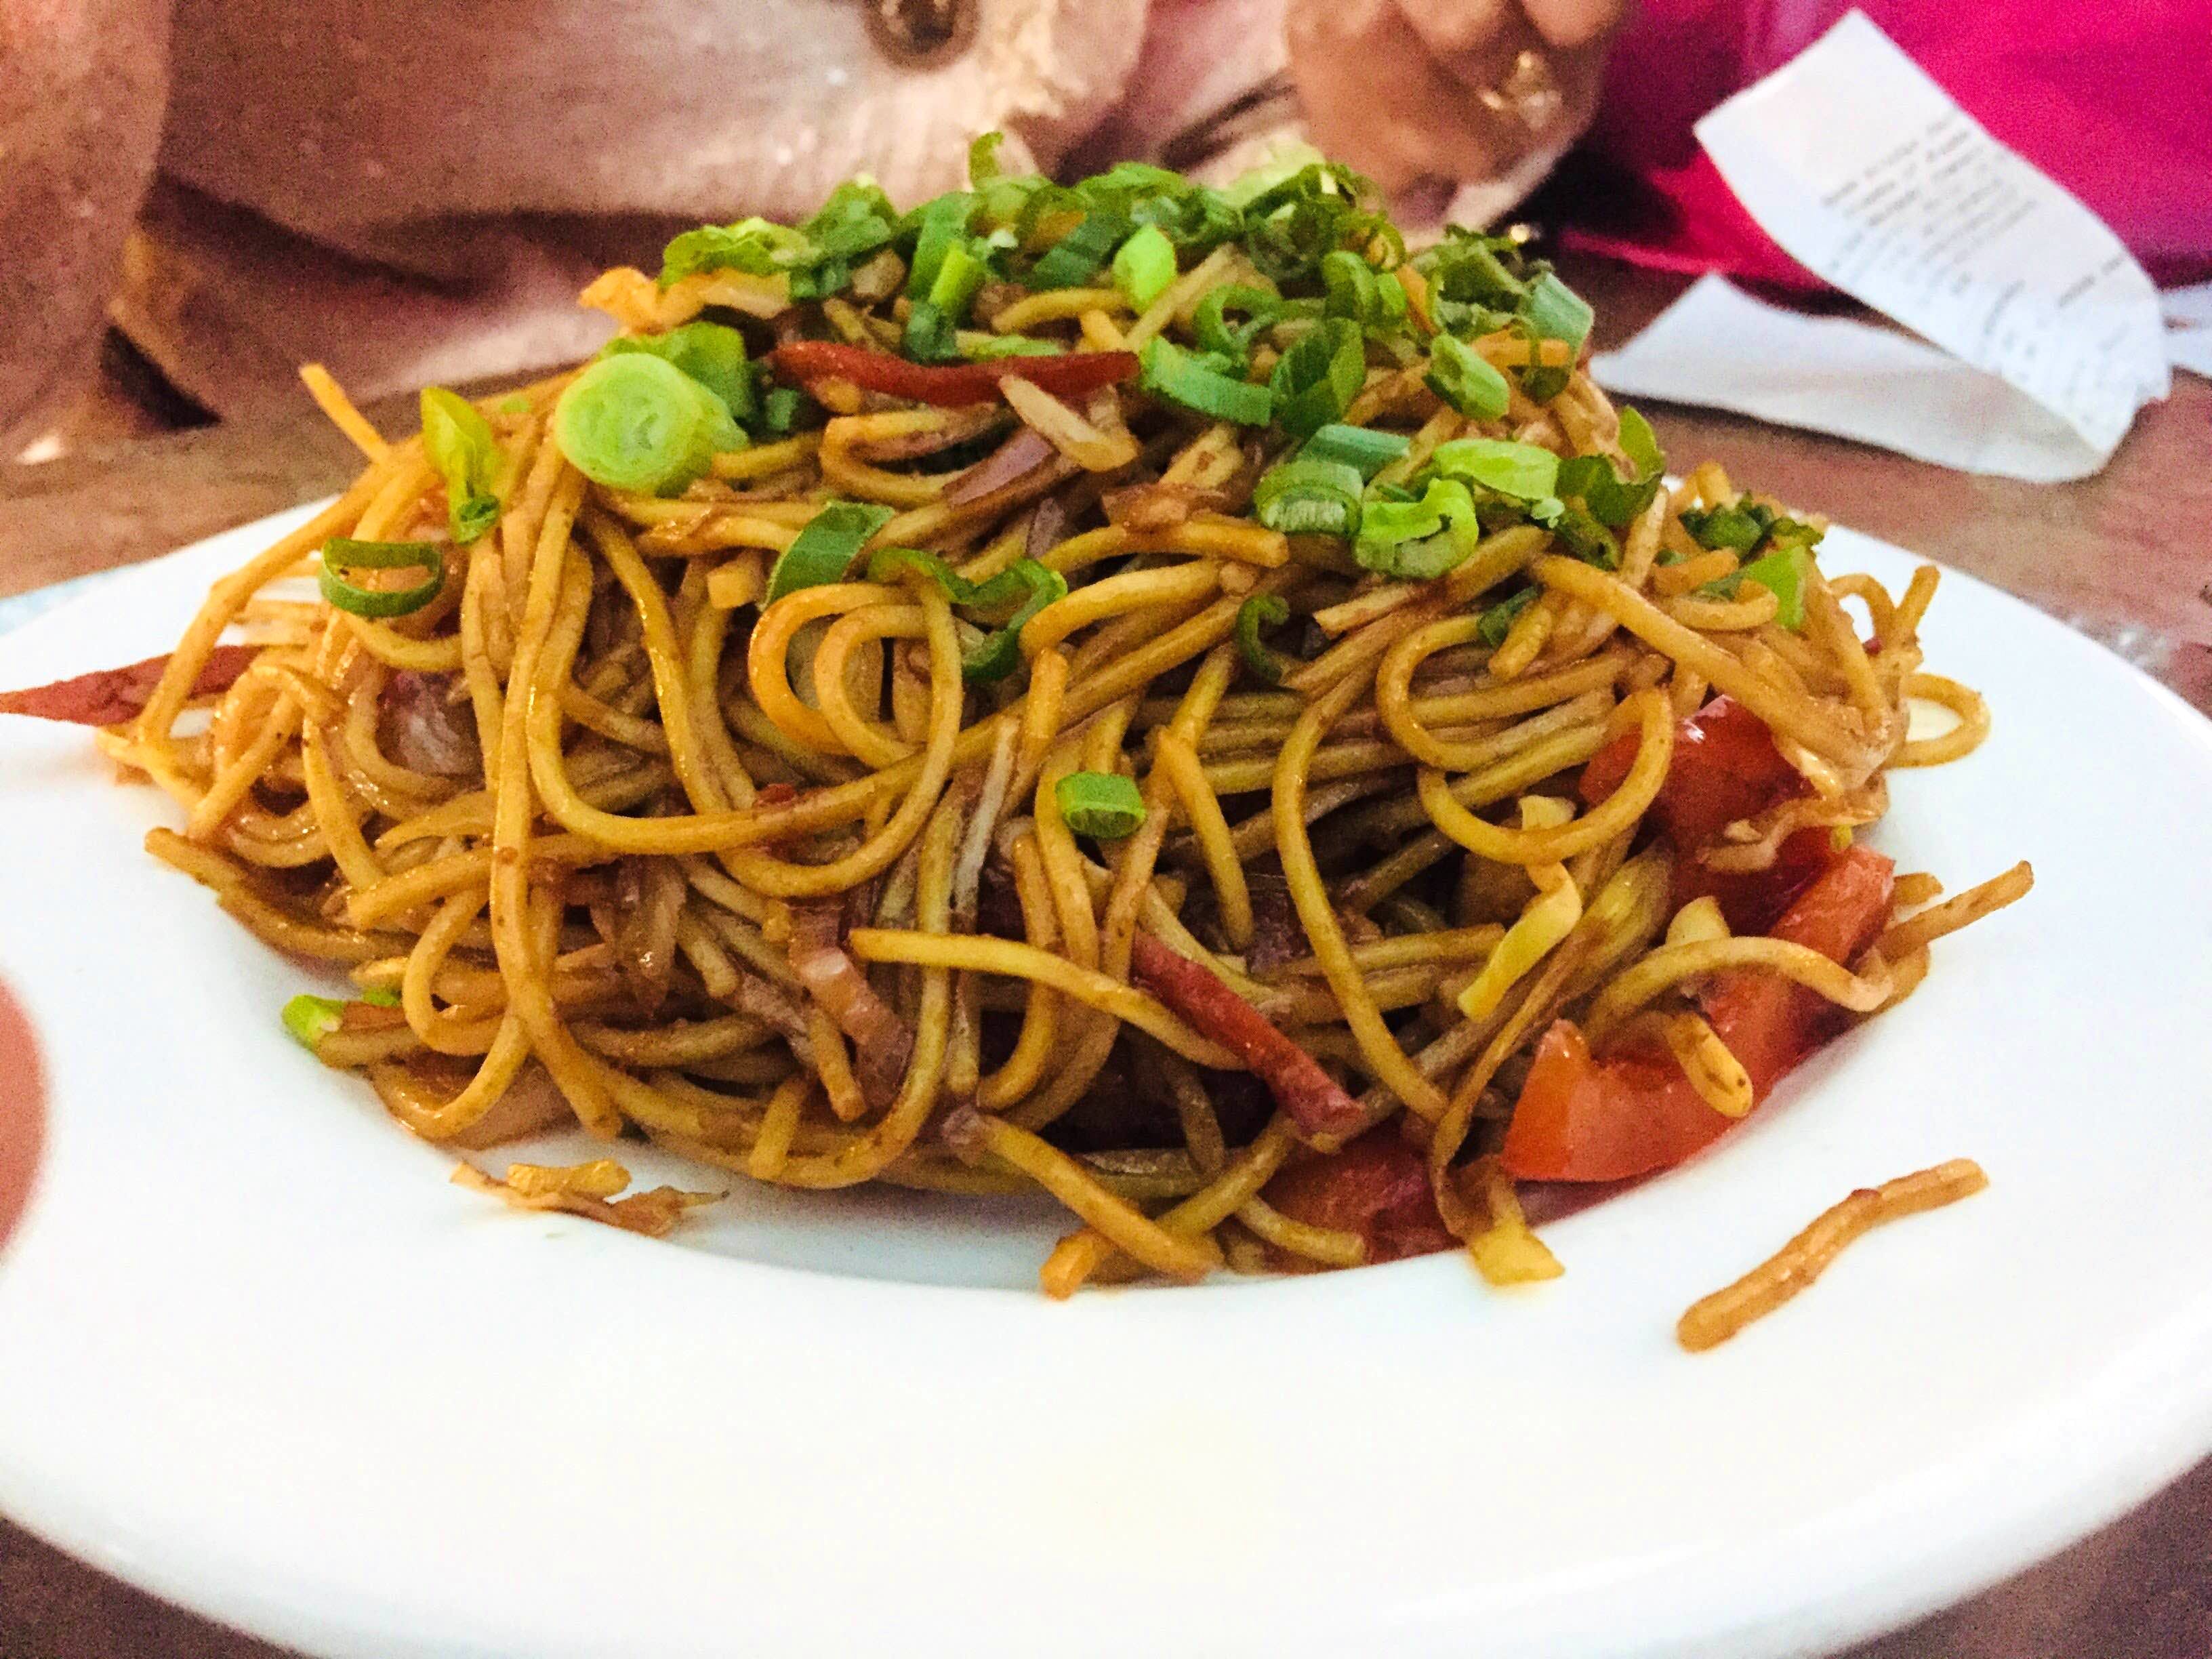 Dish,Food,Noodle,Fried noodles,Chow mein,Cuisine,Lo mein,Yakisoba,Mie goreng,Chinese noodles